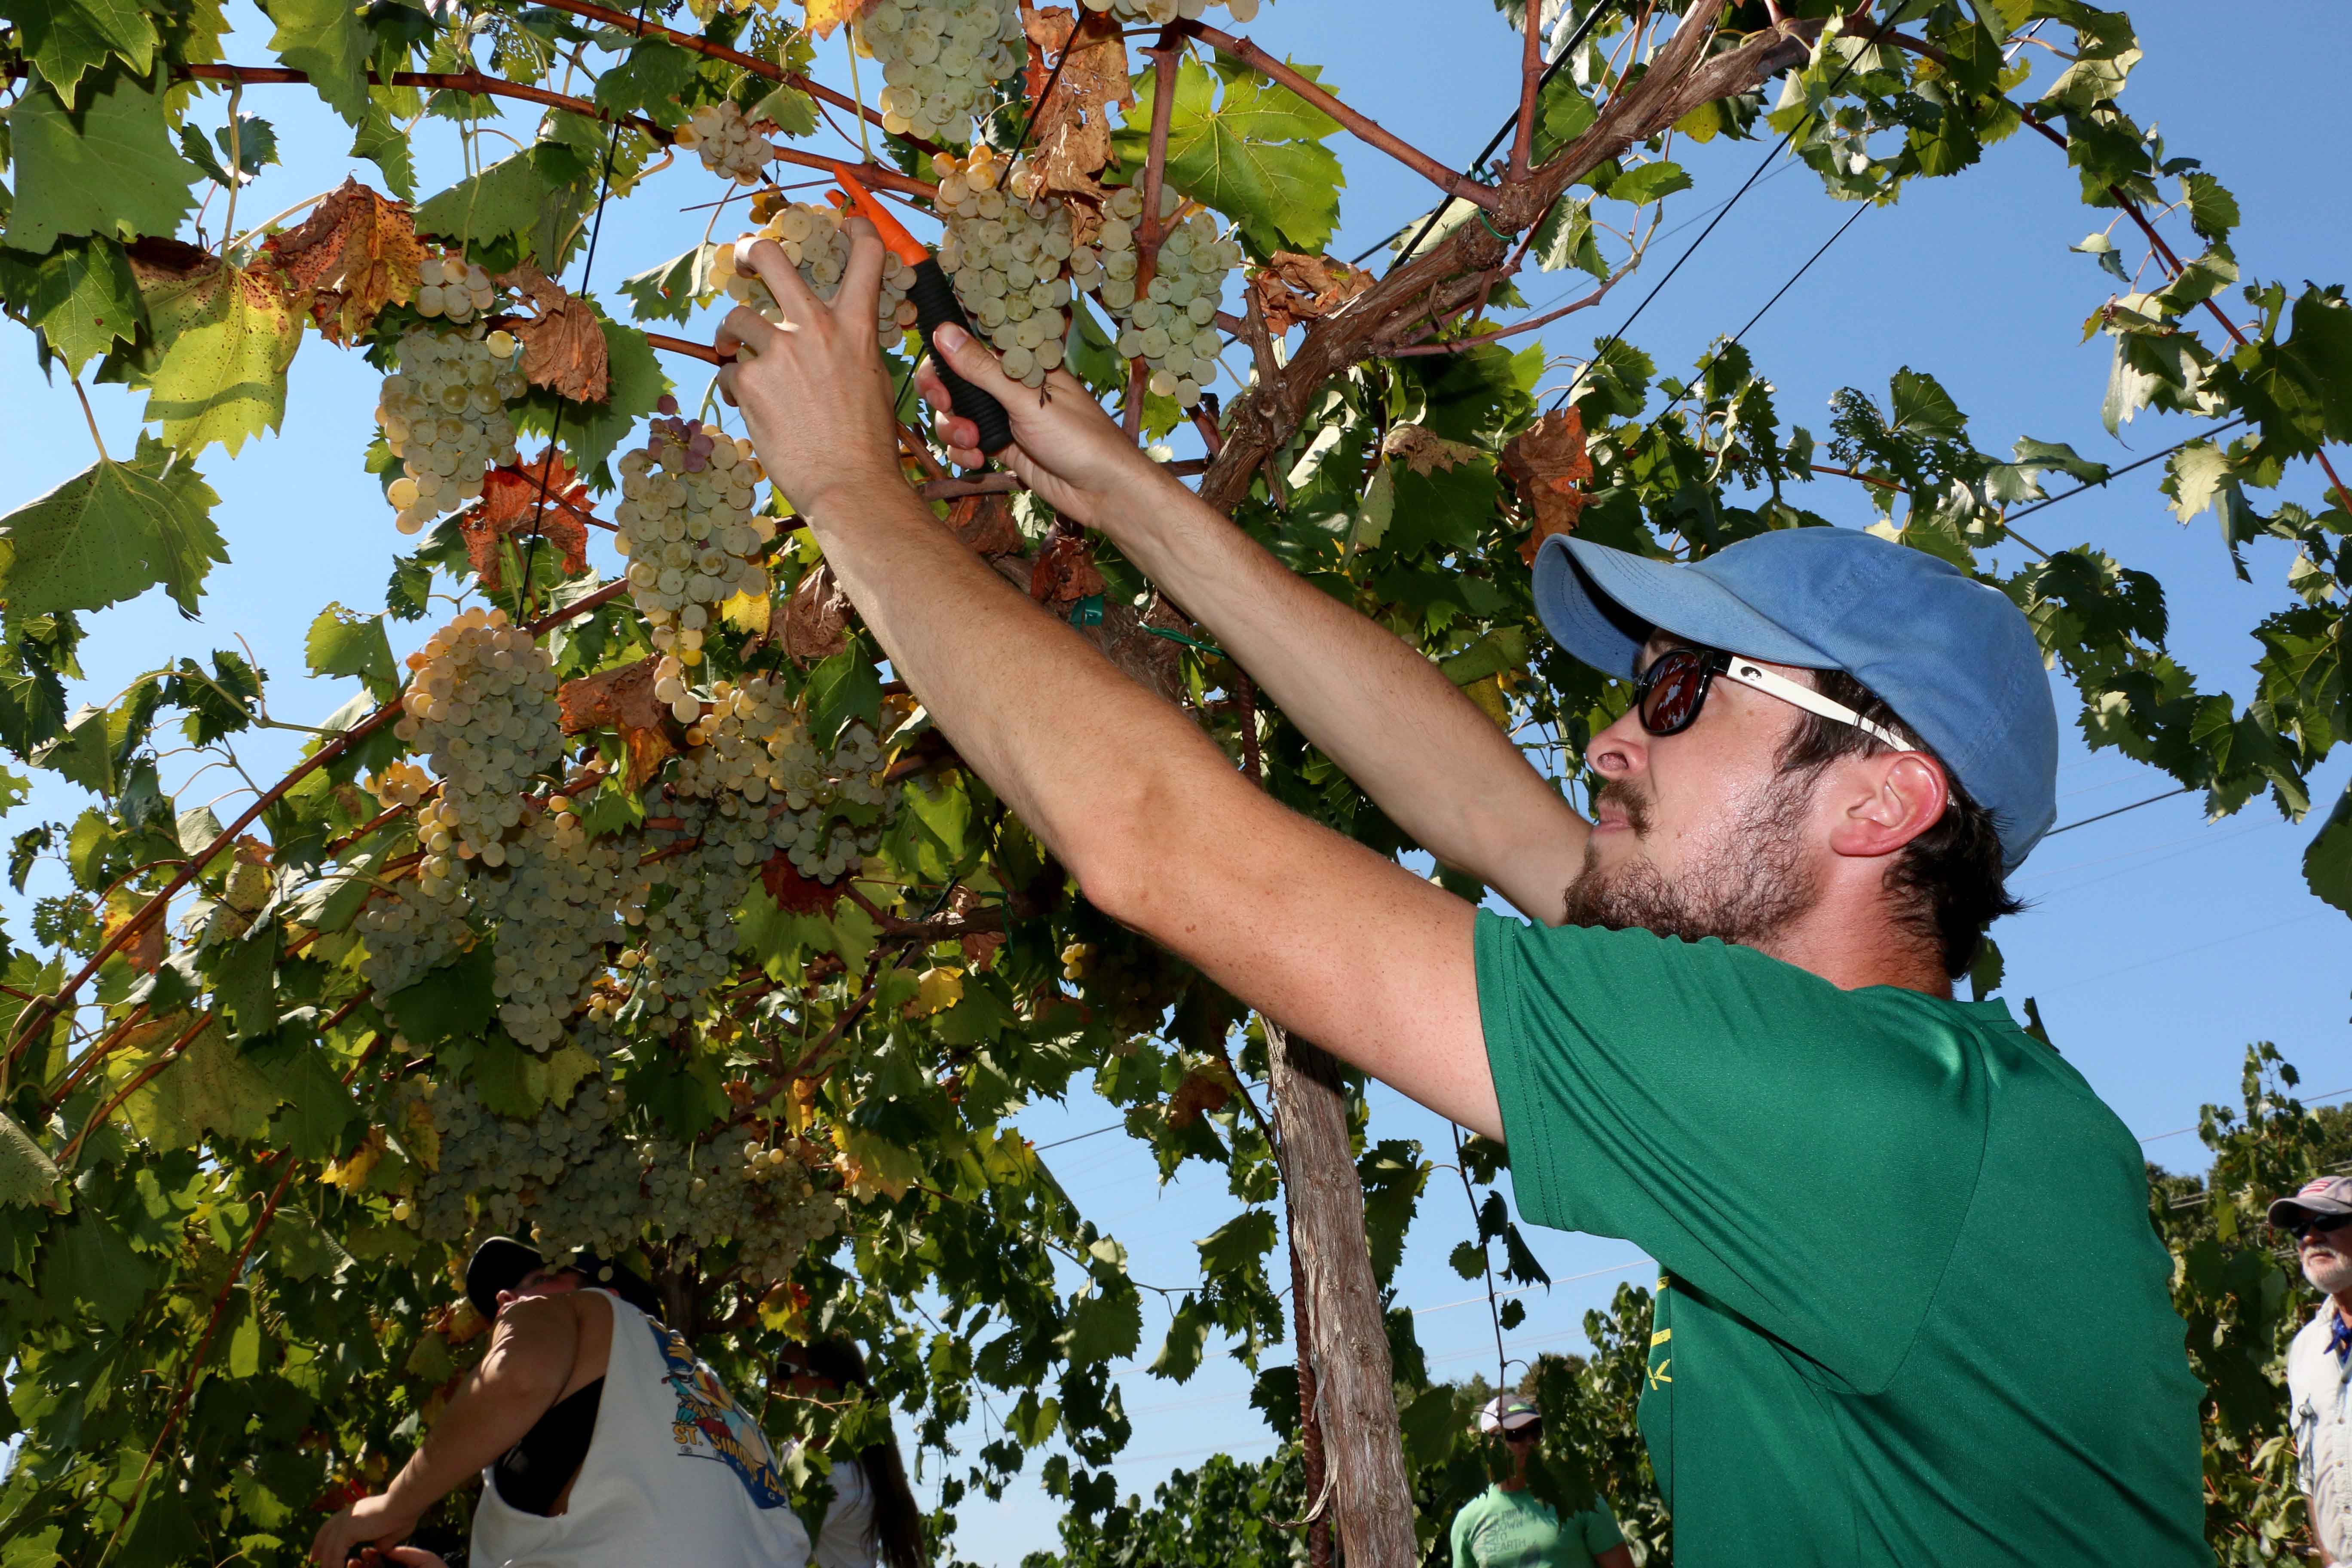 Jordan Burbage, of the UGA Soil, Plant and Water Analysis Laboratory in Athens, Georgia, harvests grapes at Trillium Vineyards, part of the collaborative research project being conducted by UGA Extension and Westover Vineyard Consulting.